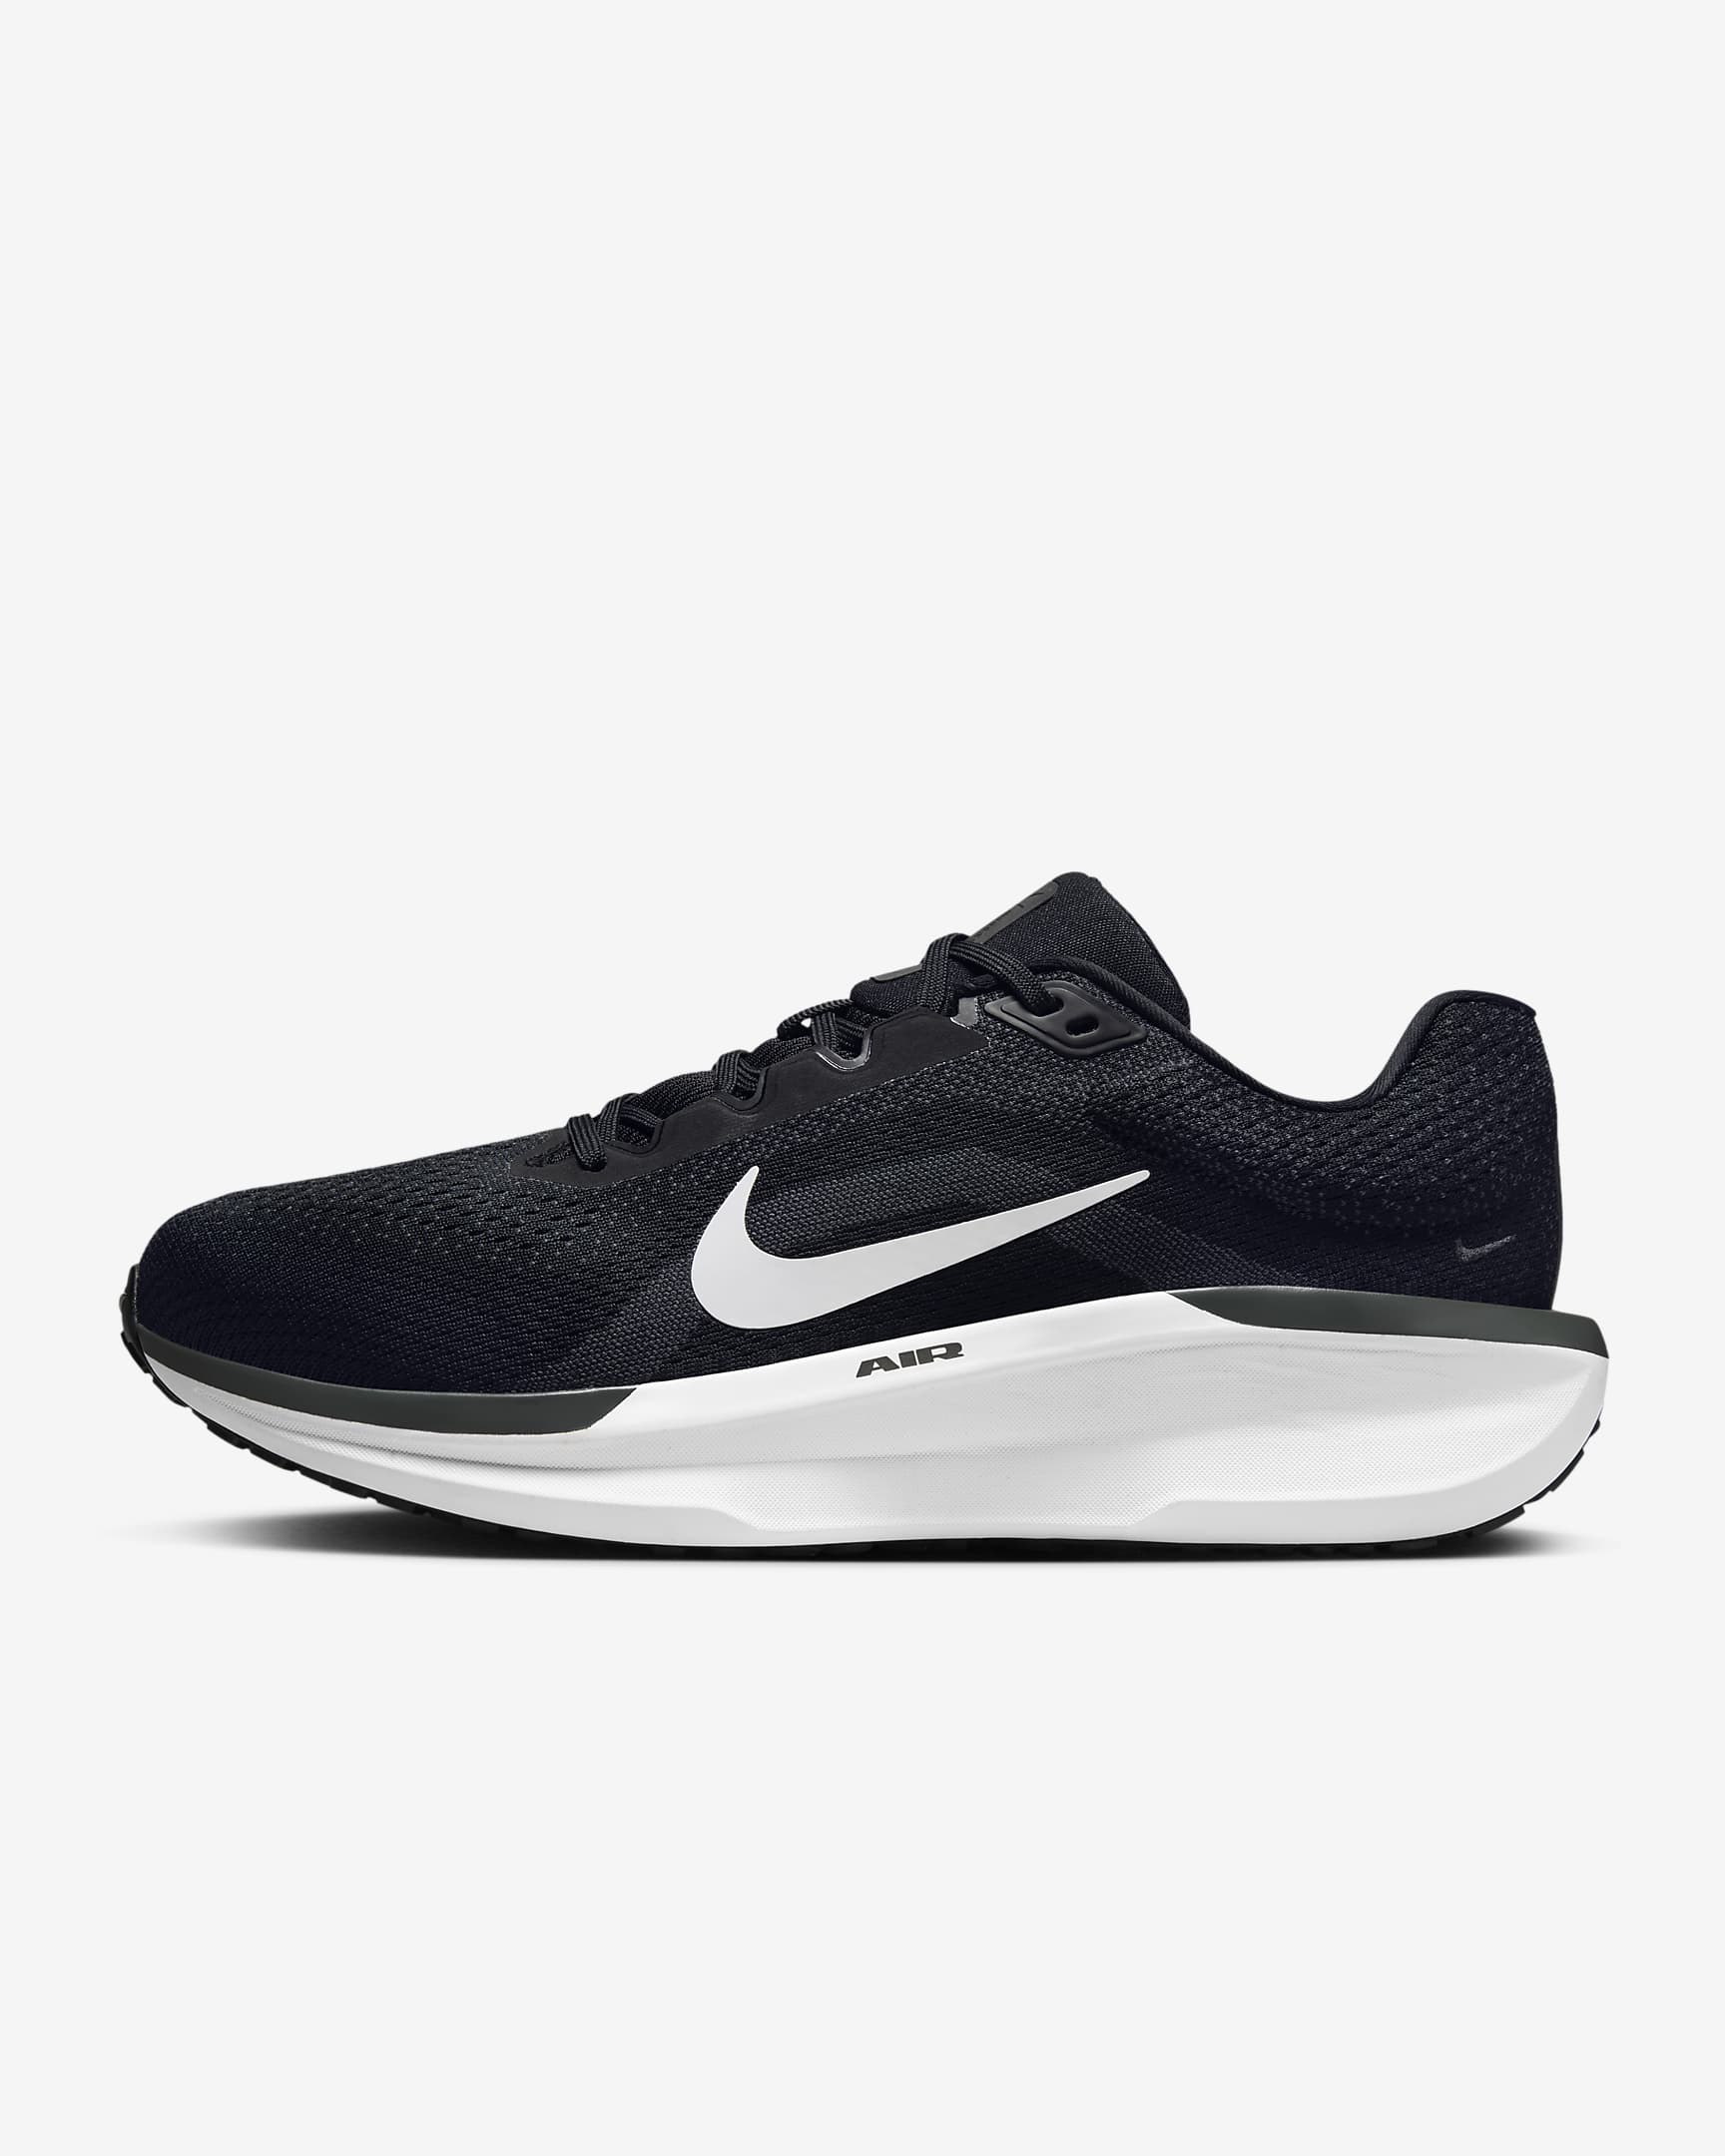 Nike Winflo 11 Men's Road Running Shoes (Extra Wide) - Black/Anthracite/Cool Grey/White